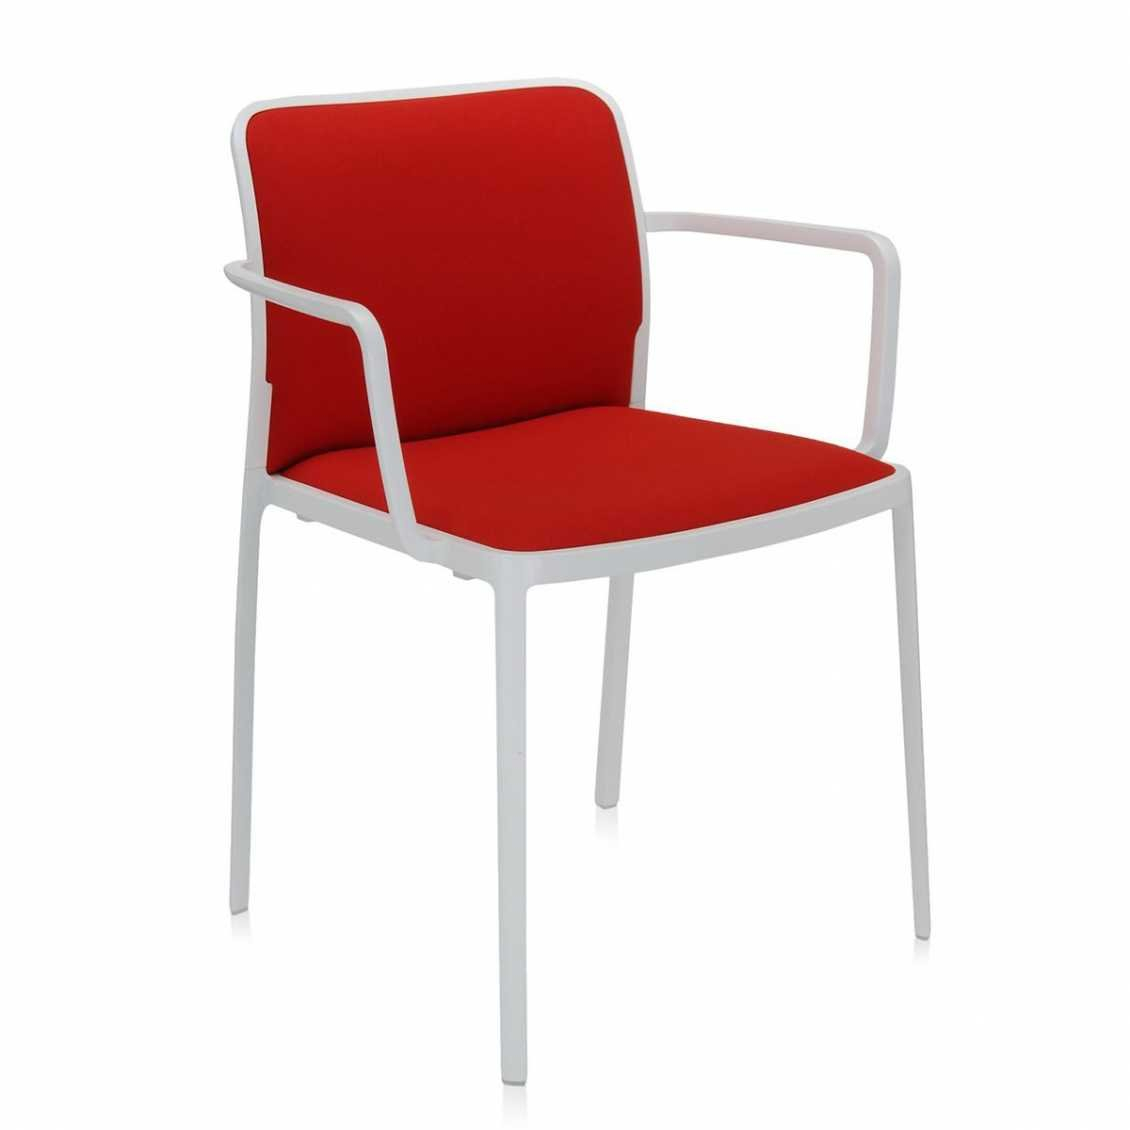 https://www.fundesign.nl/media/catalog/product/a/u/audrey-soft-armleuning-wit-rood_1.jpg